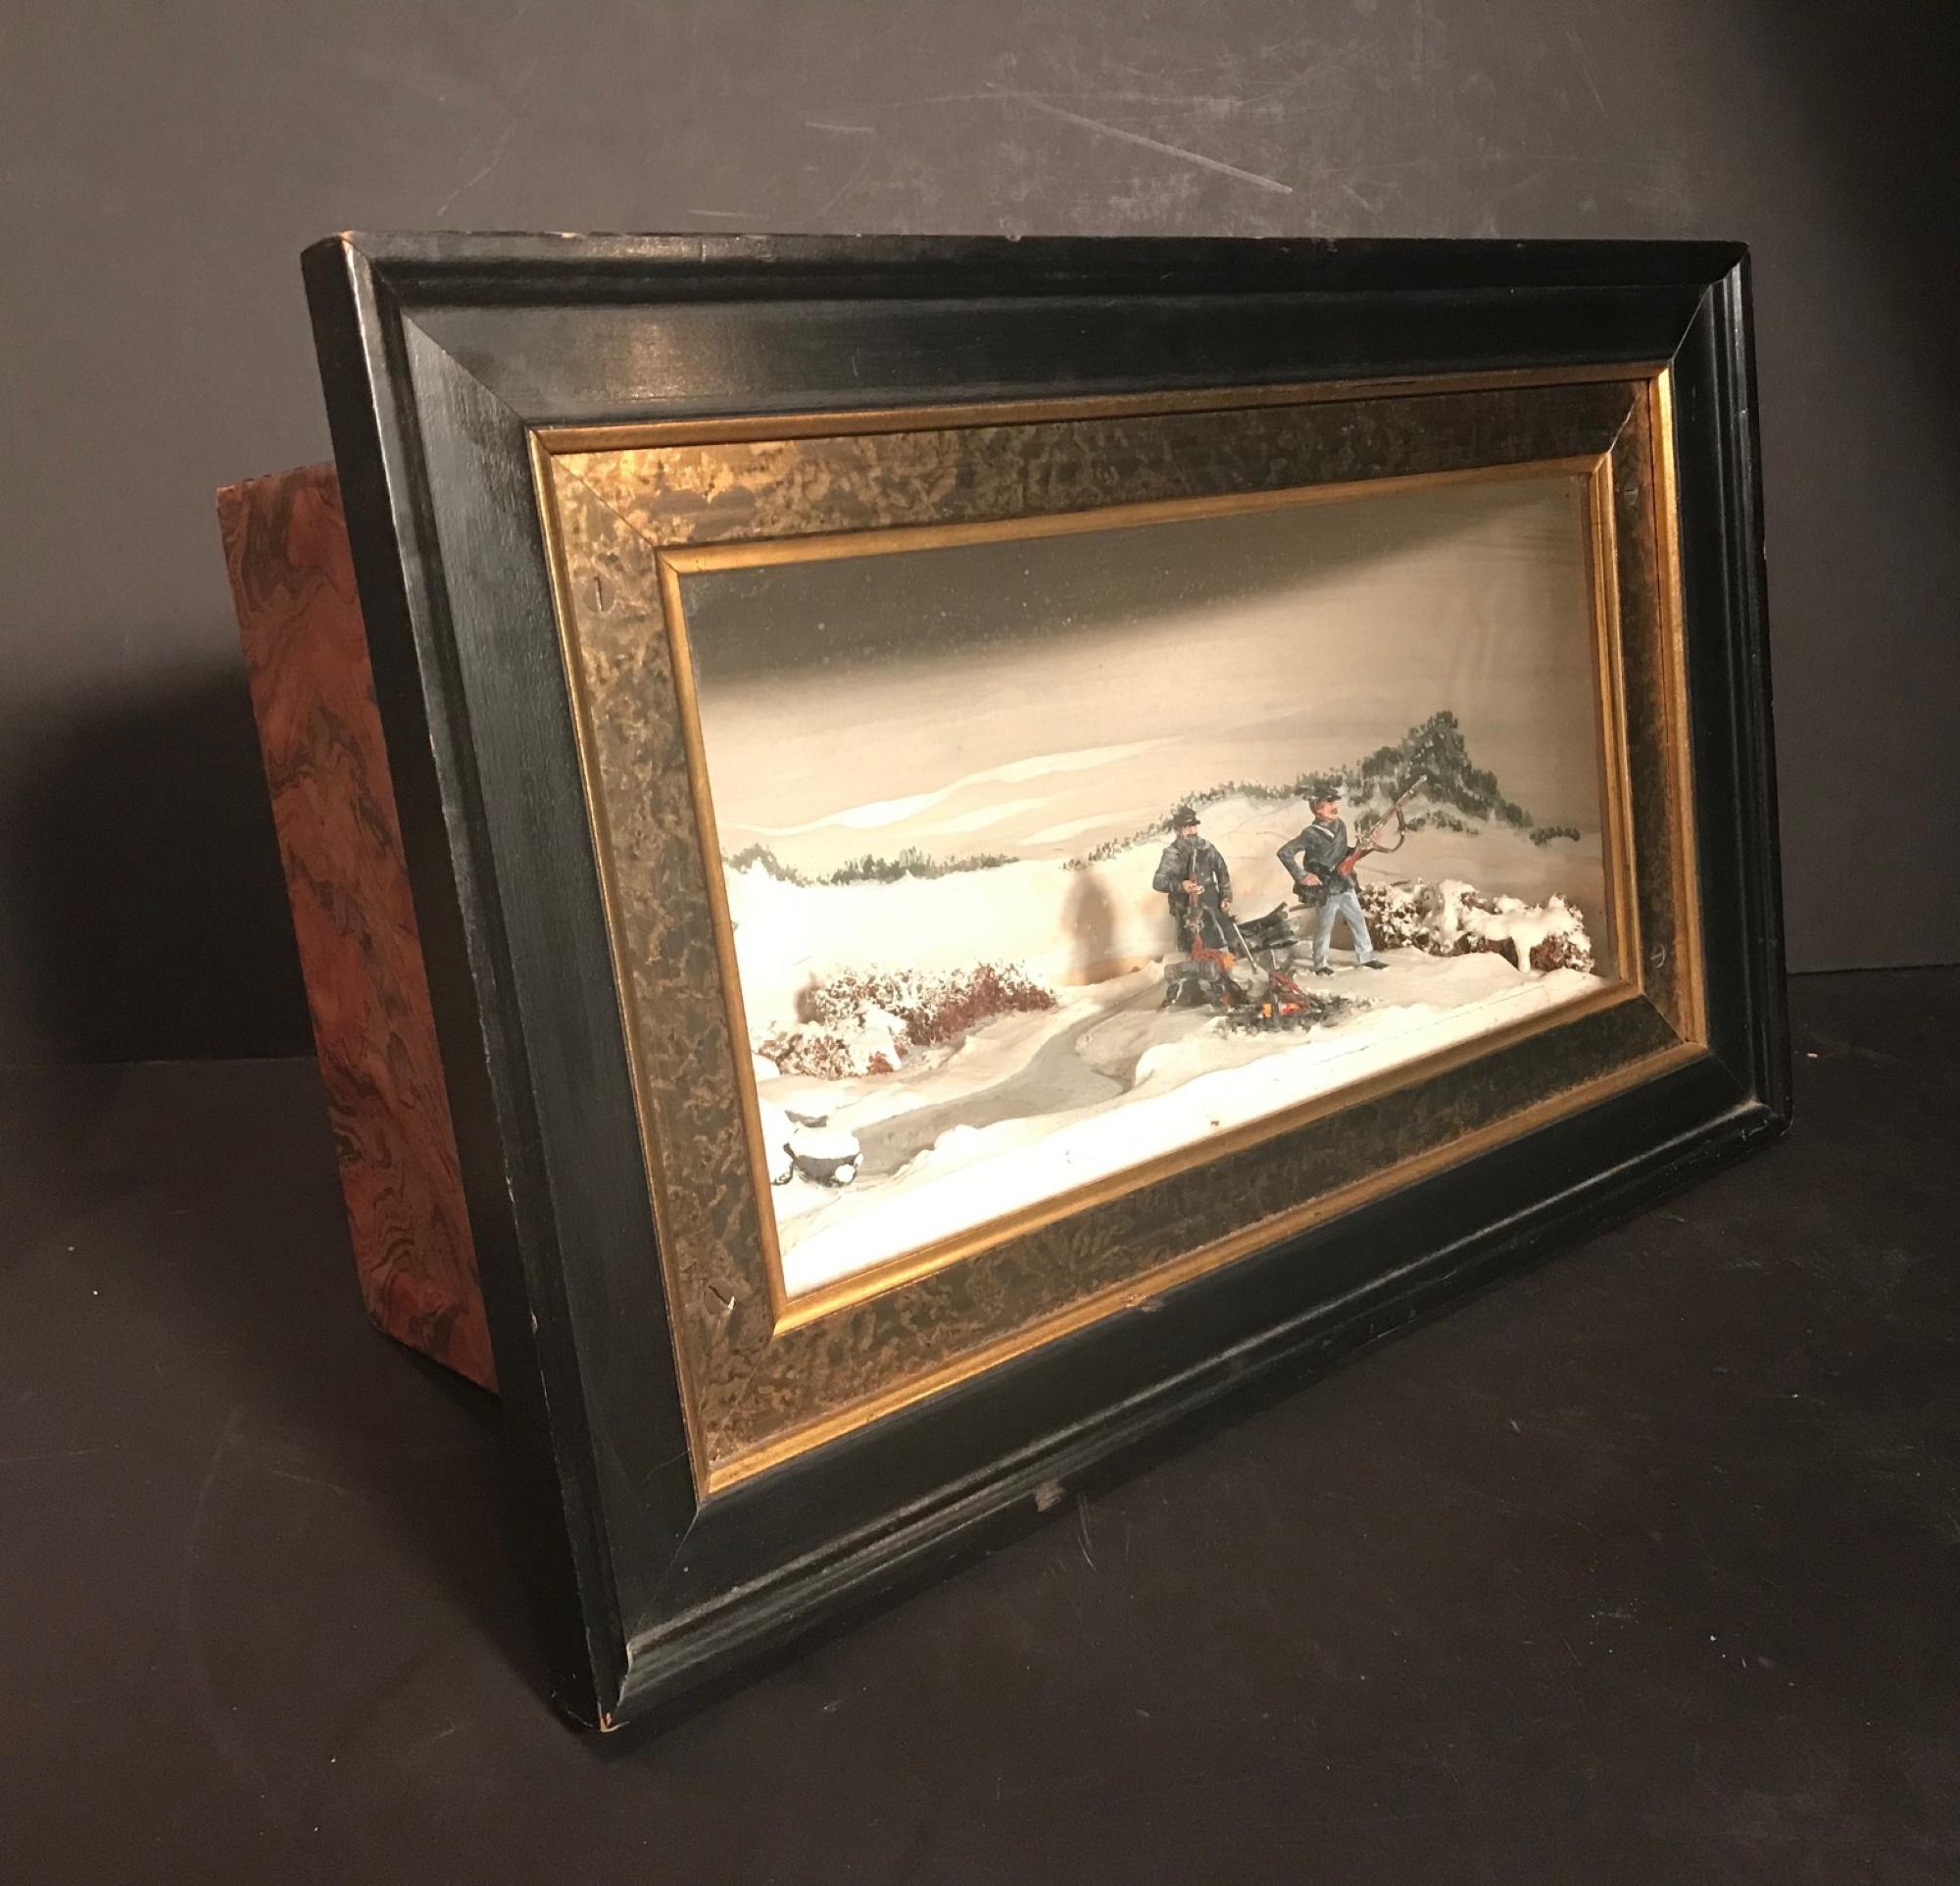 This is a magnificently imagined Civil War camp fire scene. One can almost feel the cold winter night. The recreated snow scene, a miniature, is very realistic and of the highest quality. Two hand painted Union Infantry lead soldiers on alert have a